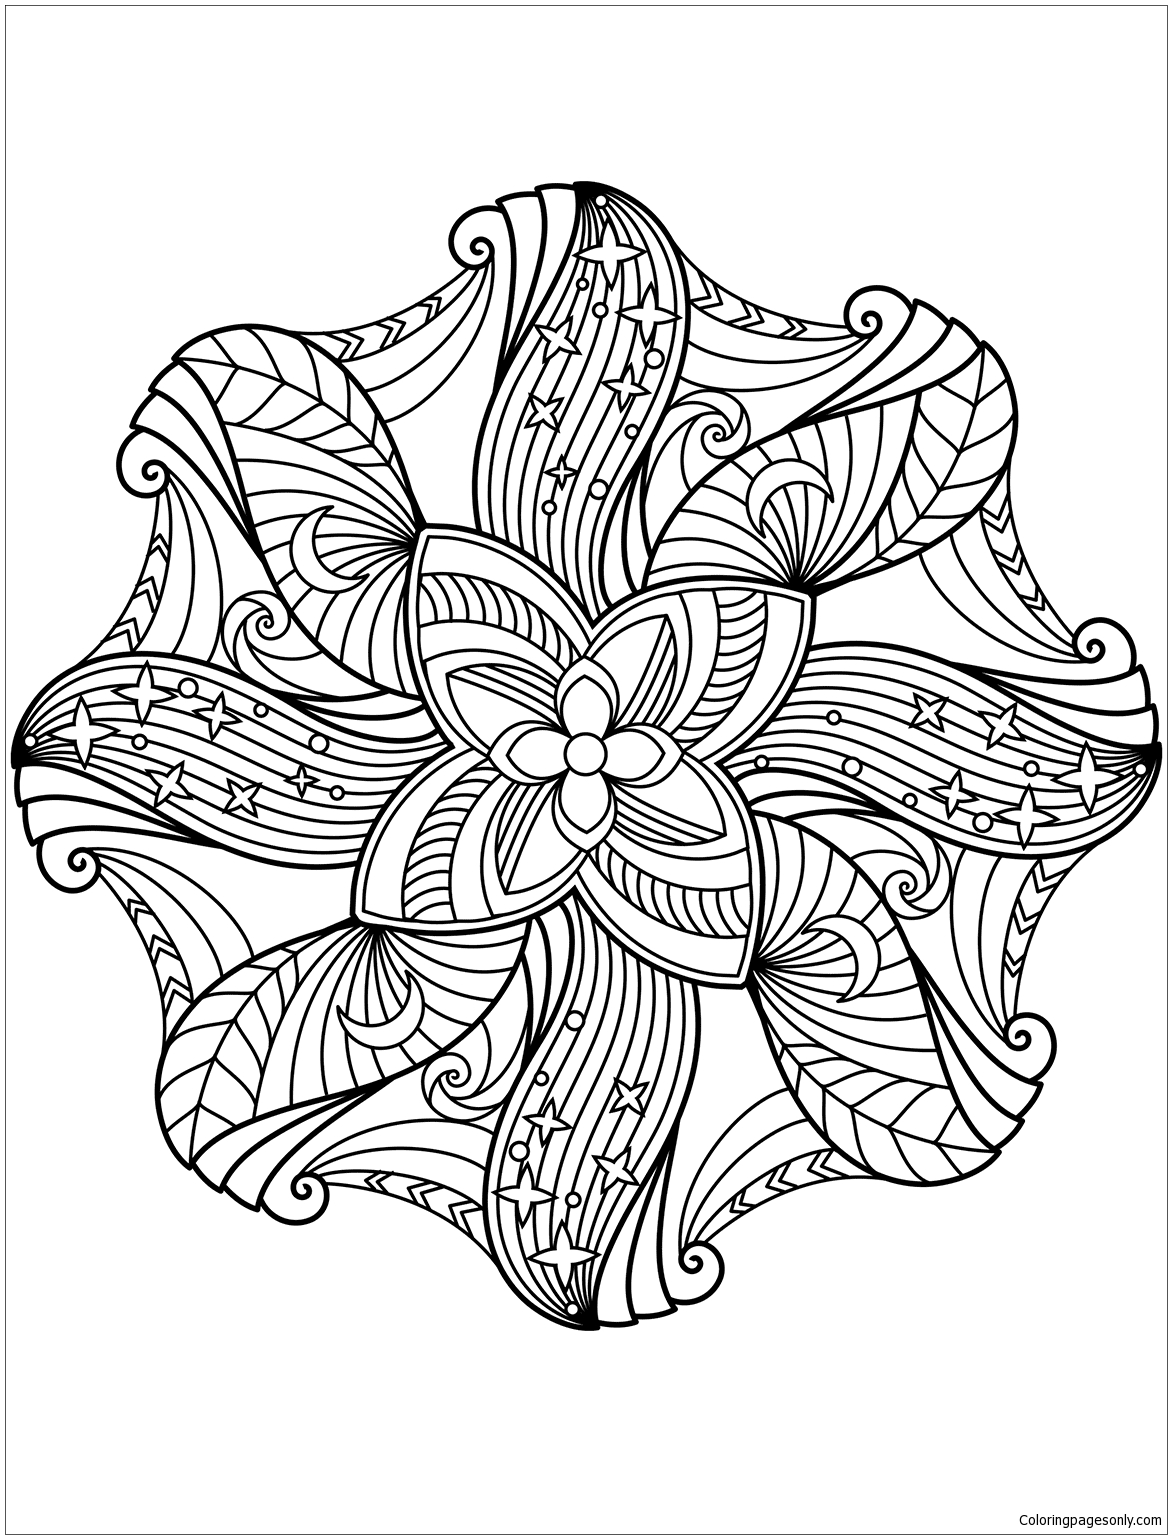 Download Flower Mandala 1 Coloring Page - Free Coloring Pages Online